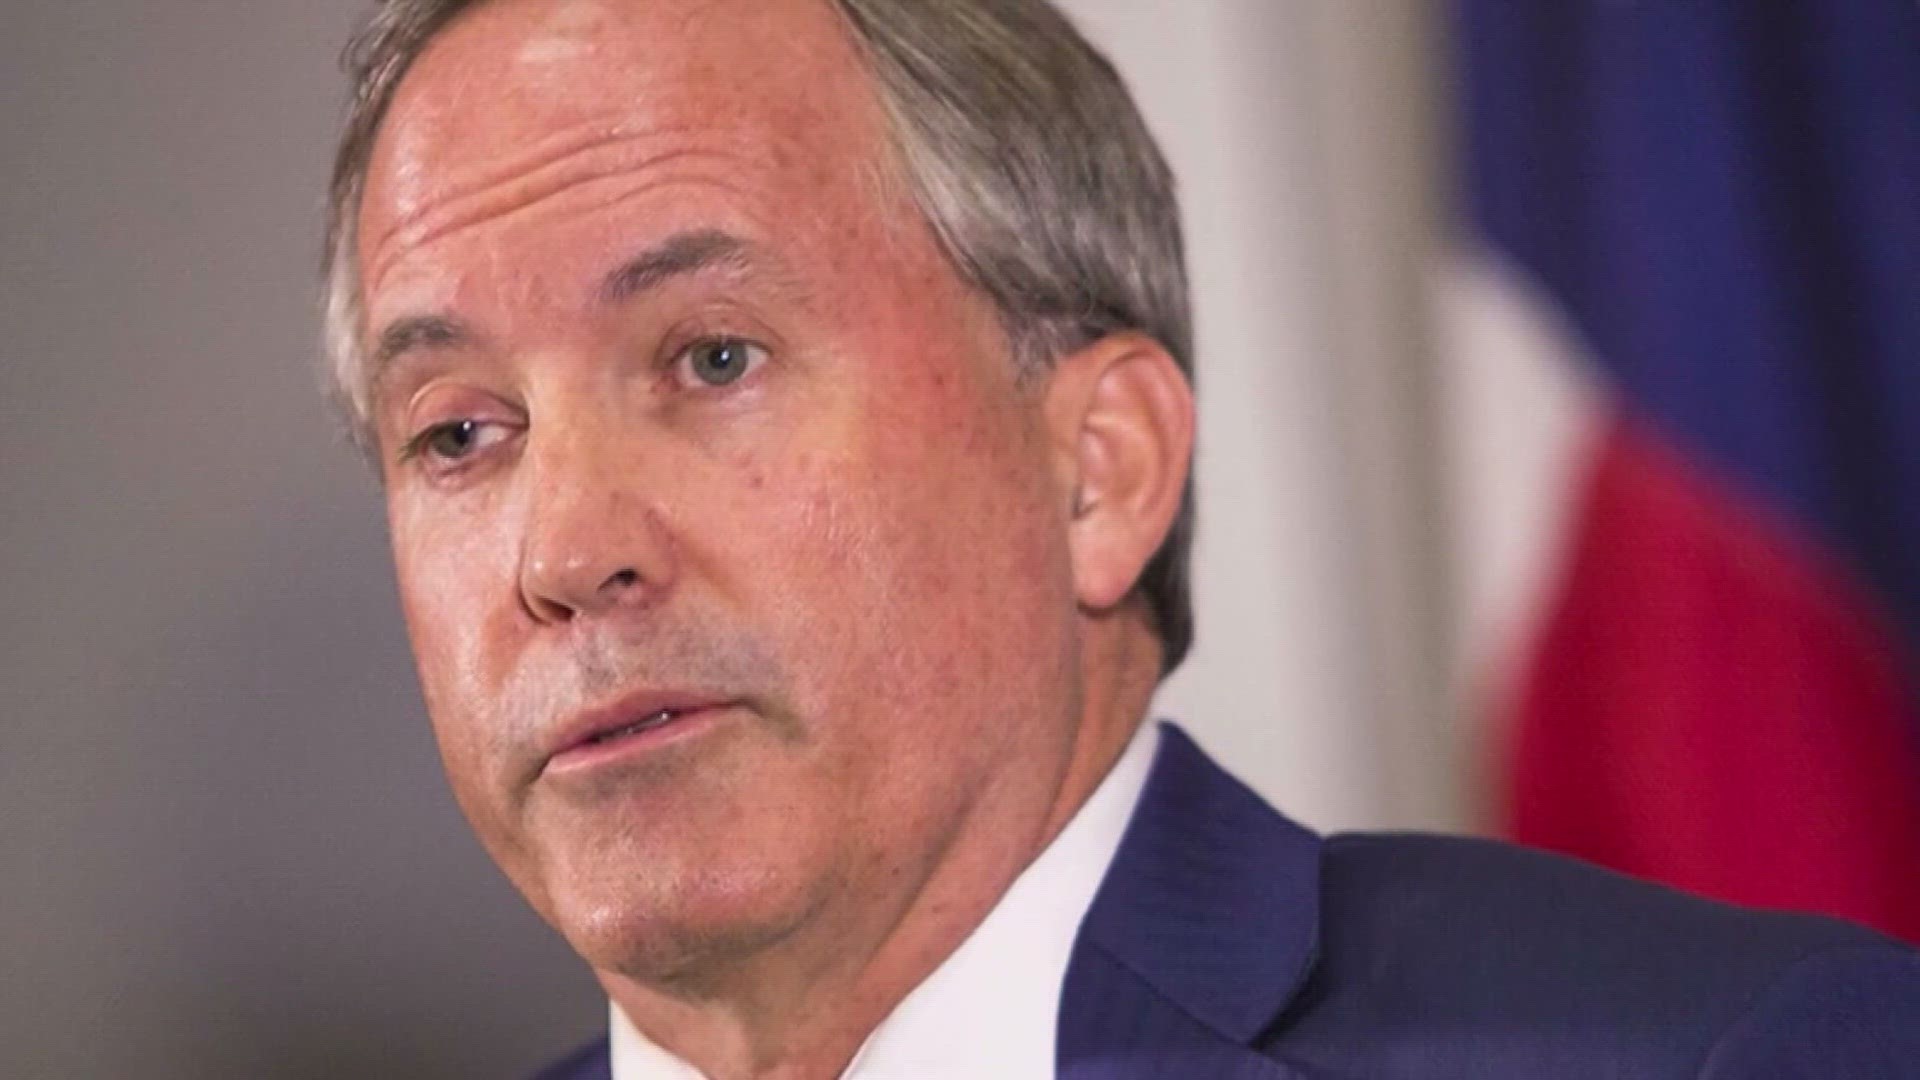 The Texas Attorney General had asked the court to pause the depositions through an appeal.